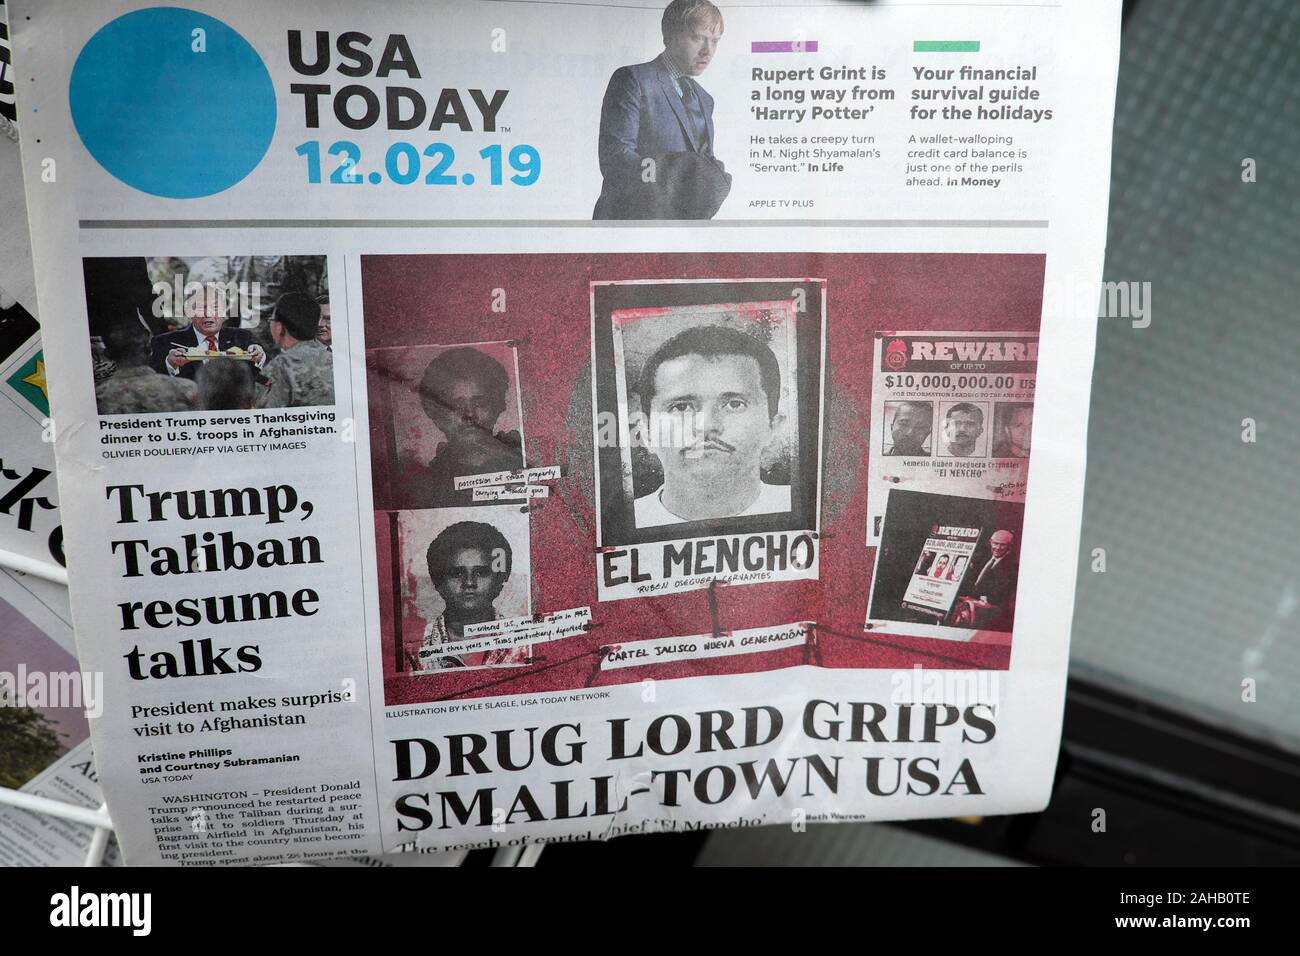 Usa Today Newspaper Front Page Headlines El Mencho Drug Lord Grips Small Town Usa And Trump Taliban Resume Talks In Afghanistan 12 2 19 Stock Photo Alamy